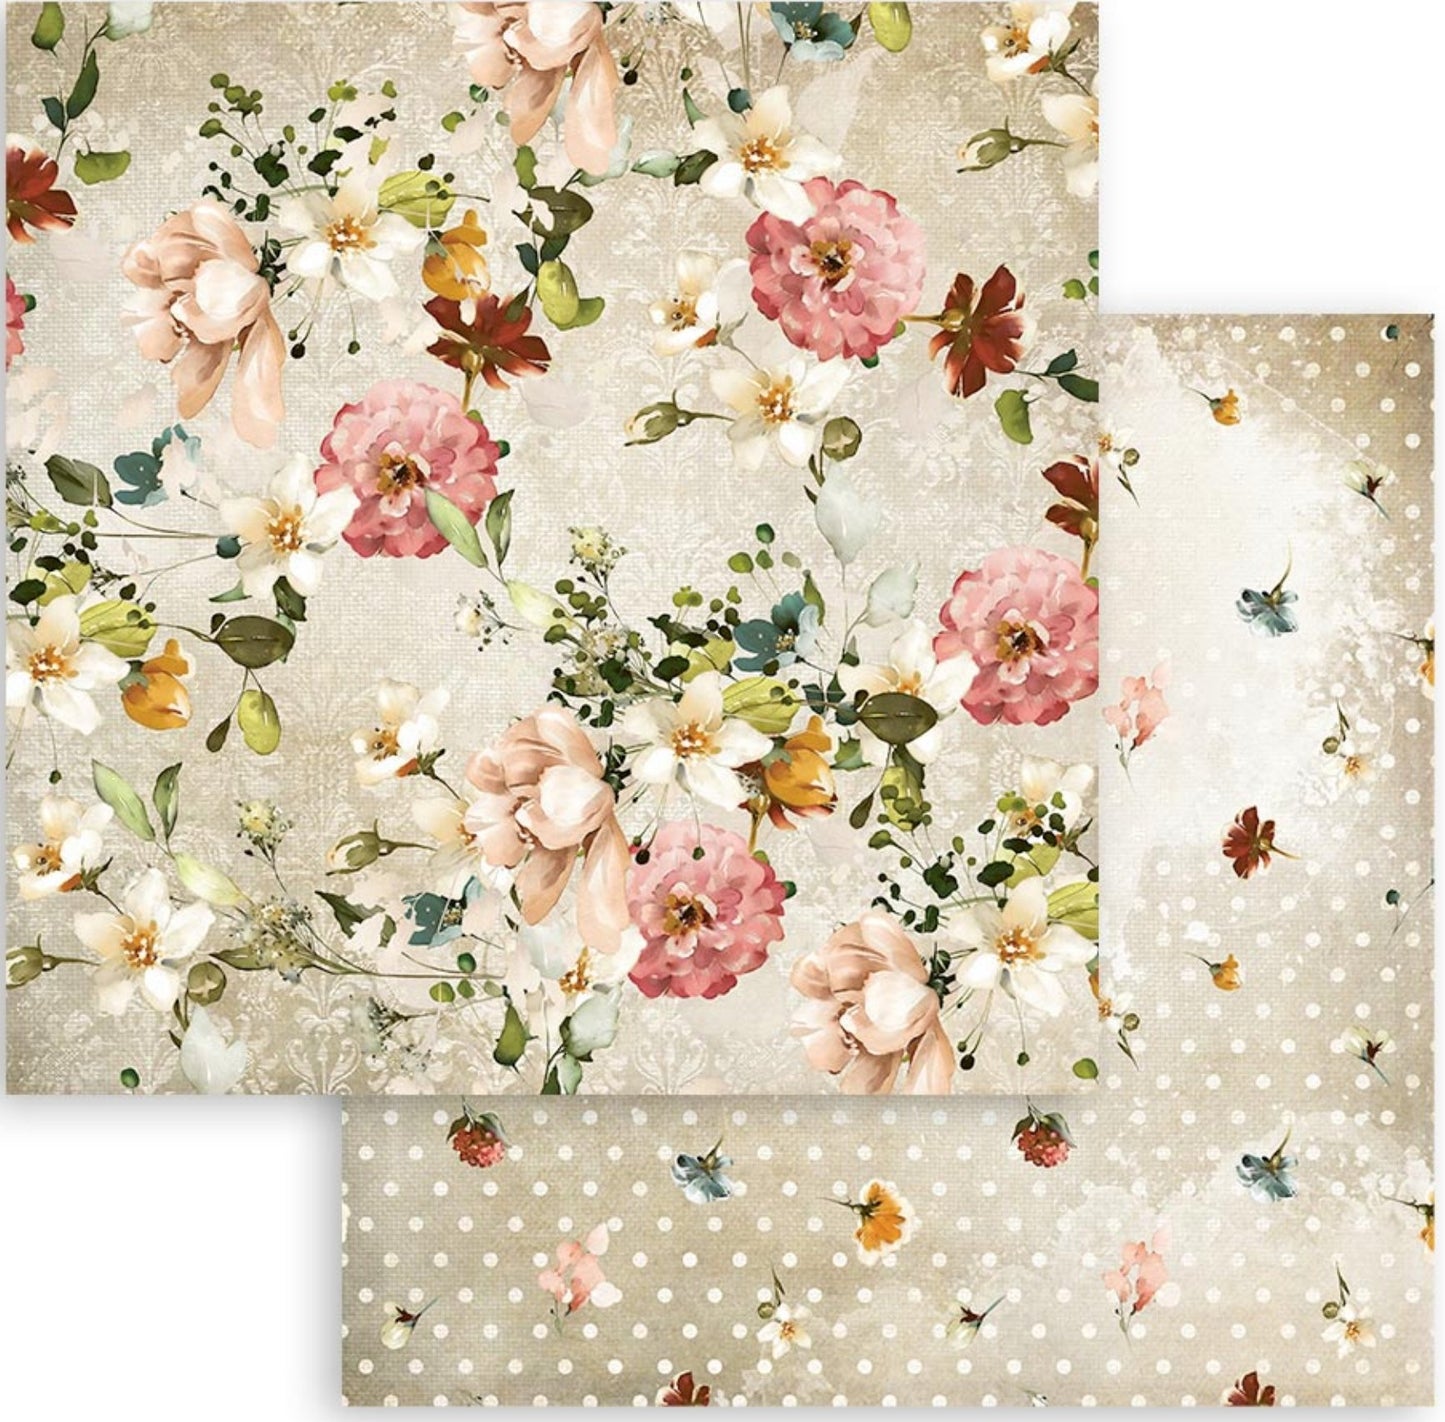 Stamperia - Scrapbooking Pad 10 sheets cm 30,5x30,5 (12"x12") - Garden of Promises Stamperia